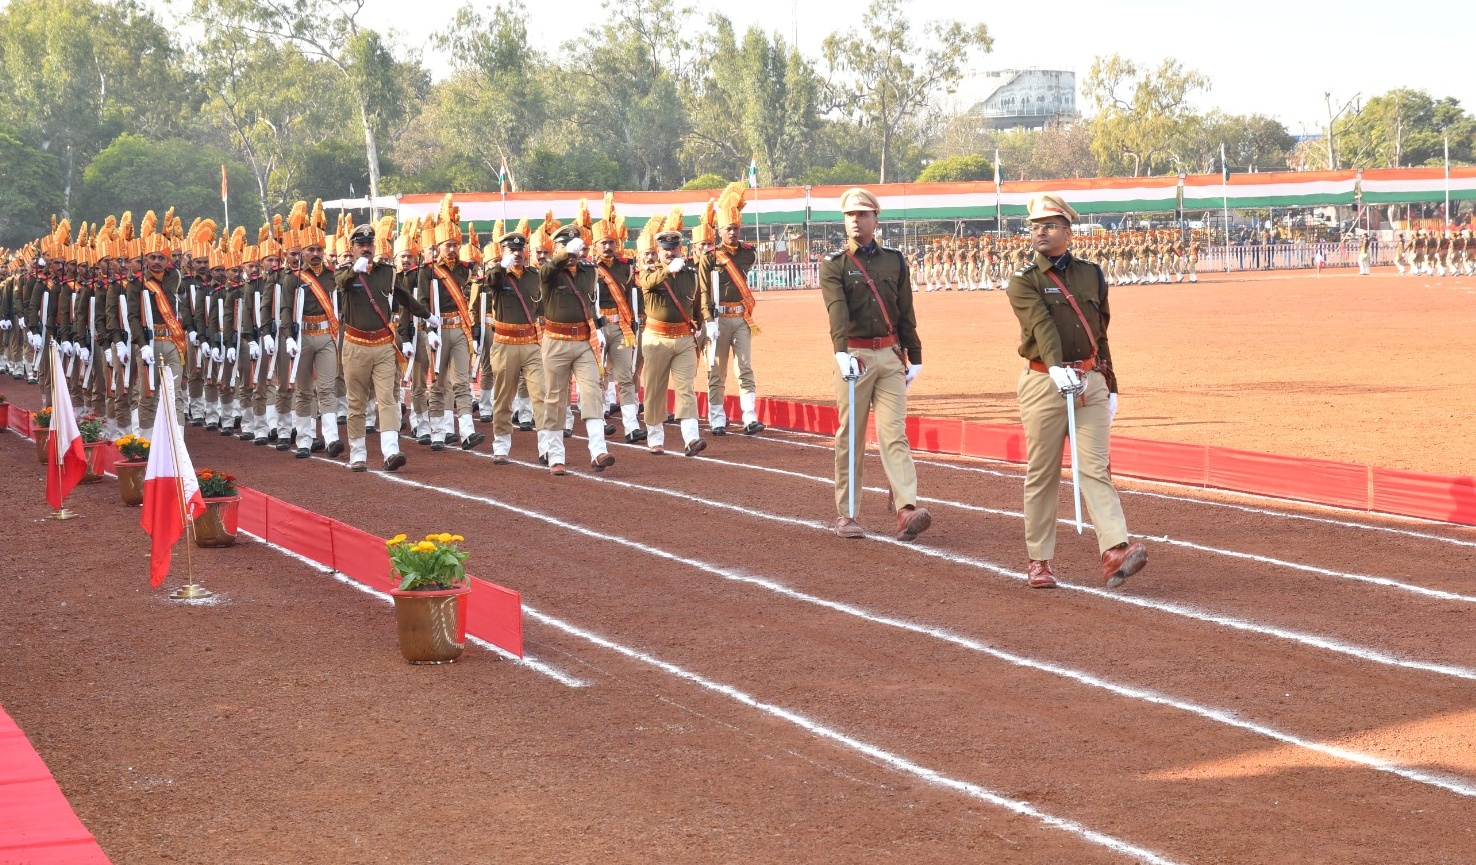 Bhopal Final rehearsal of state level Republic Day